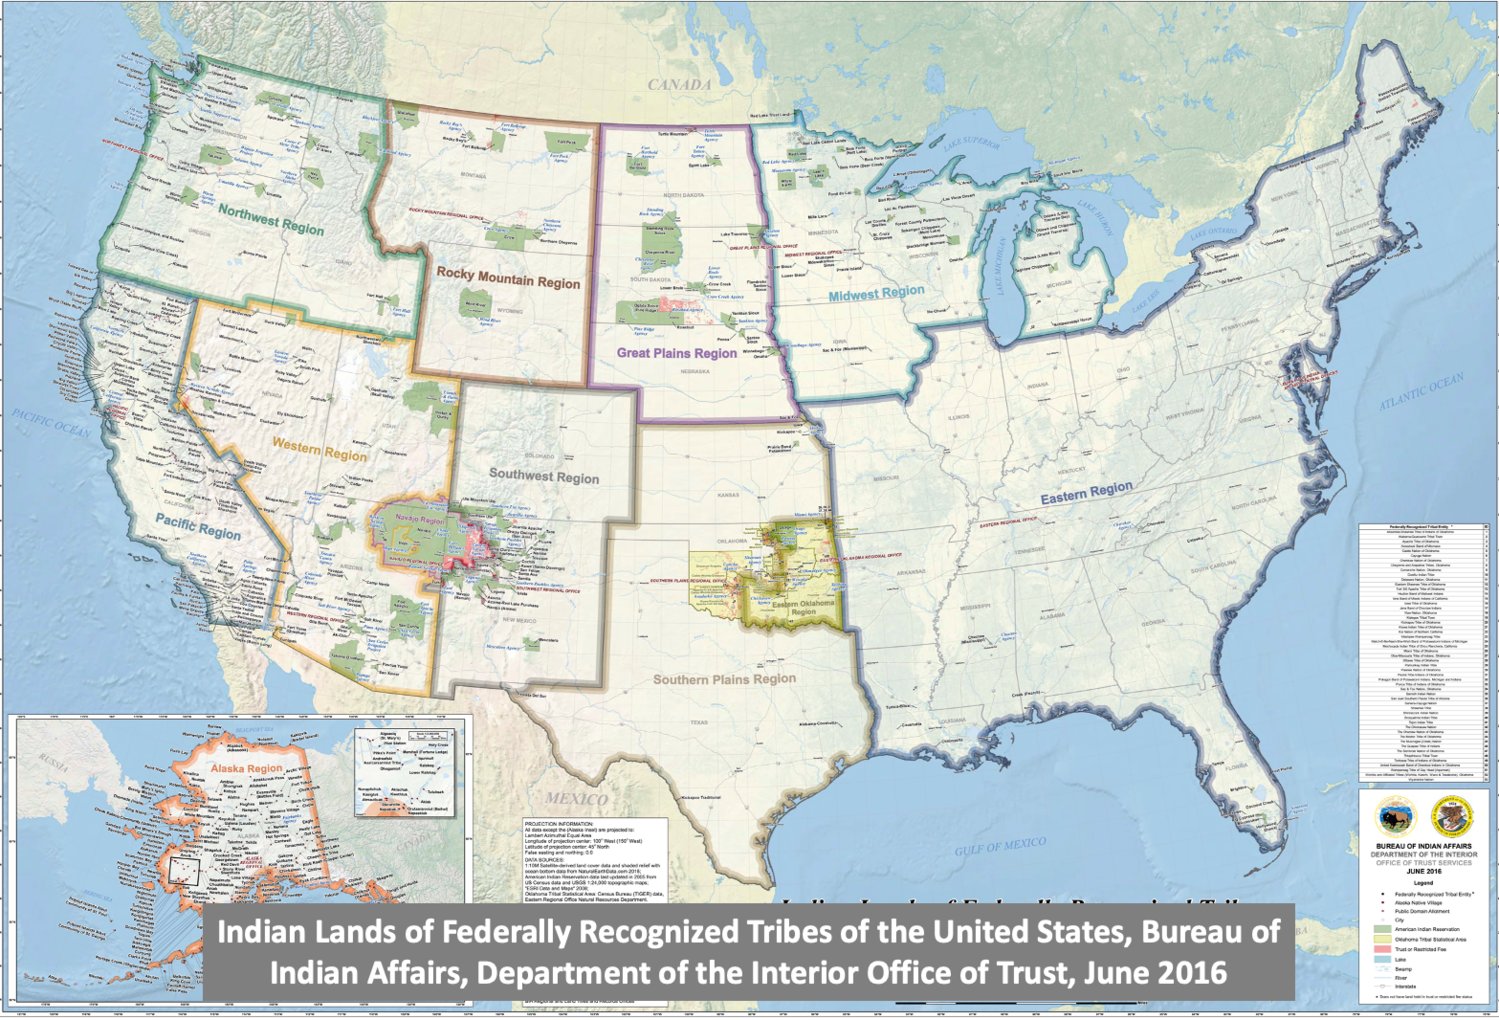 Indian Lands of Federally Recognized Tribes of the United States, Bureau of Indian Affairs, Department of the Interior Office of Trust, June 2016